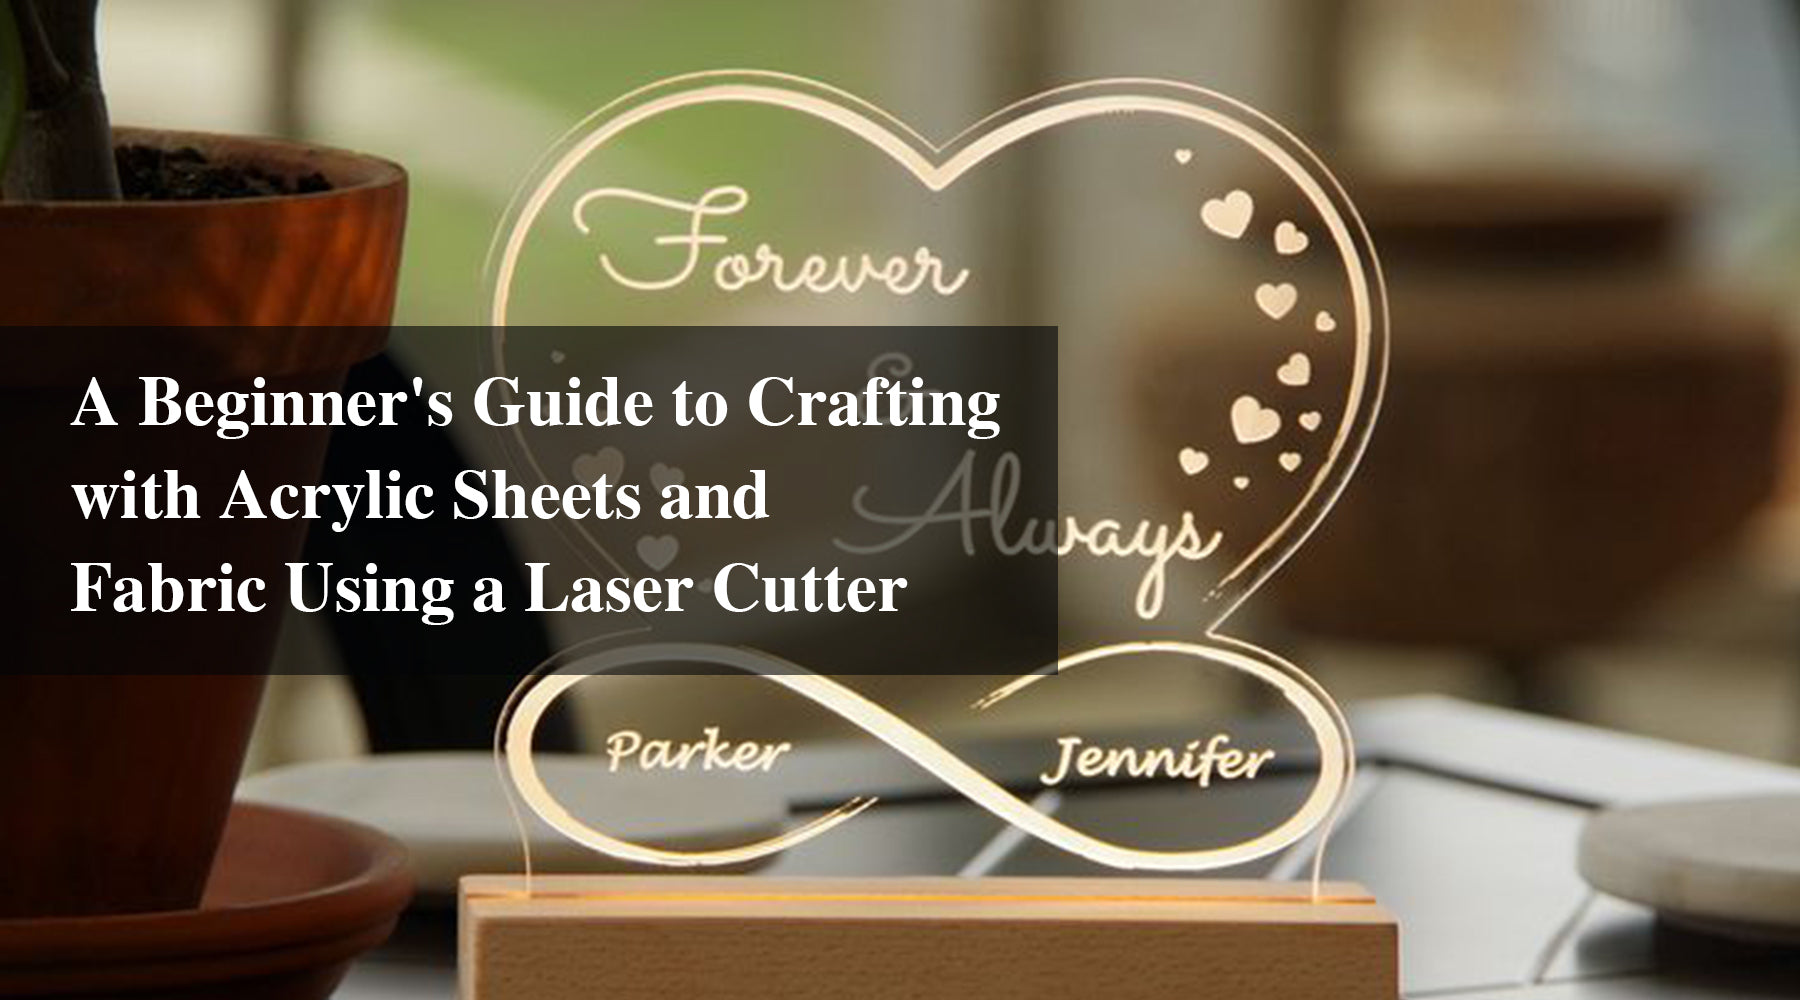 A Beginner's Guide to Crafting with Acrylic Sheets and Fabric Using a Laser Cutter